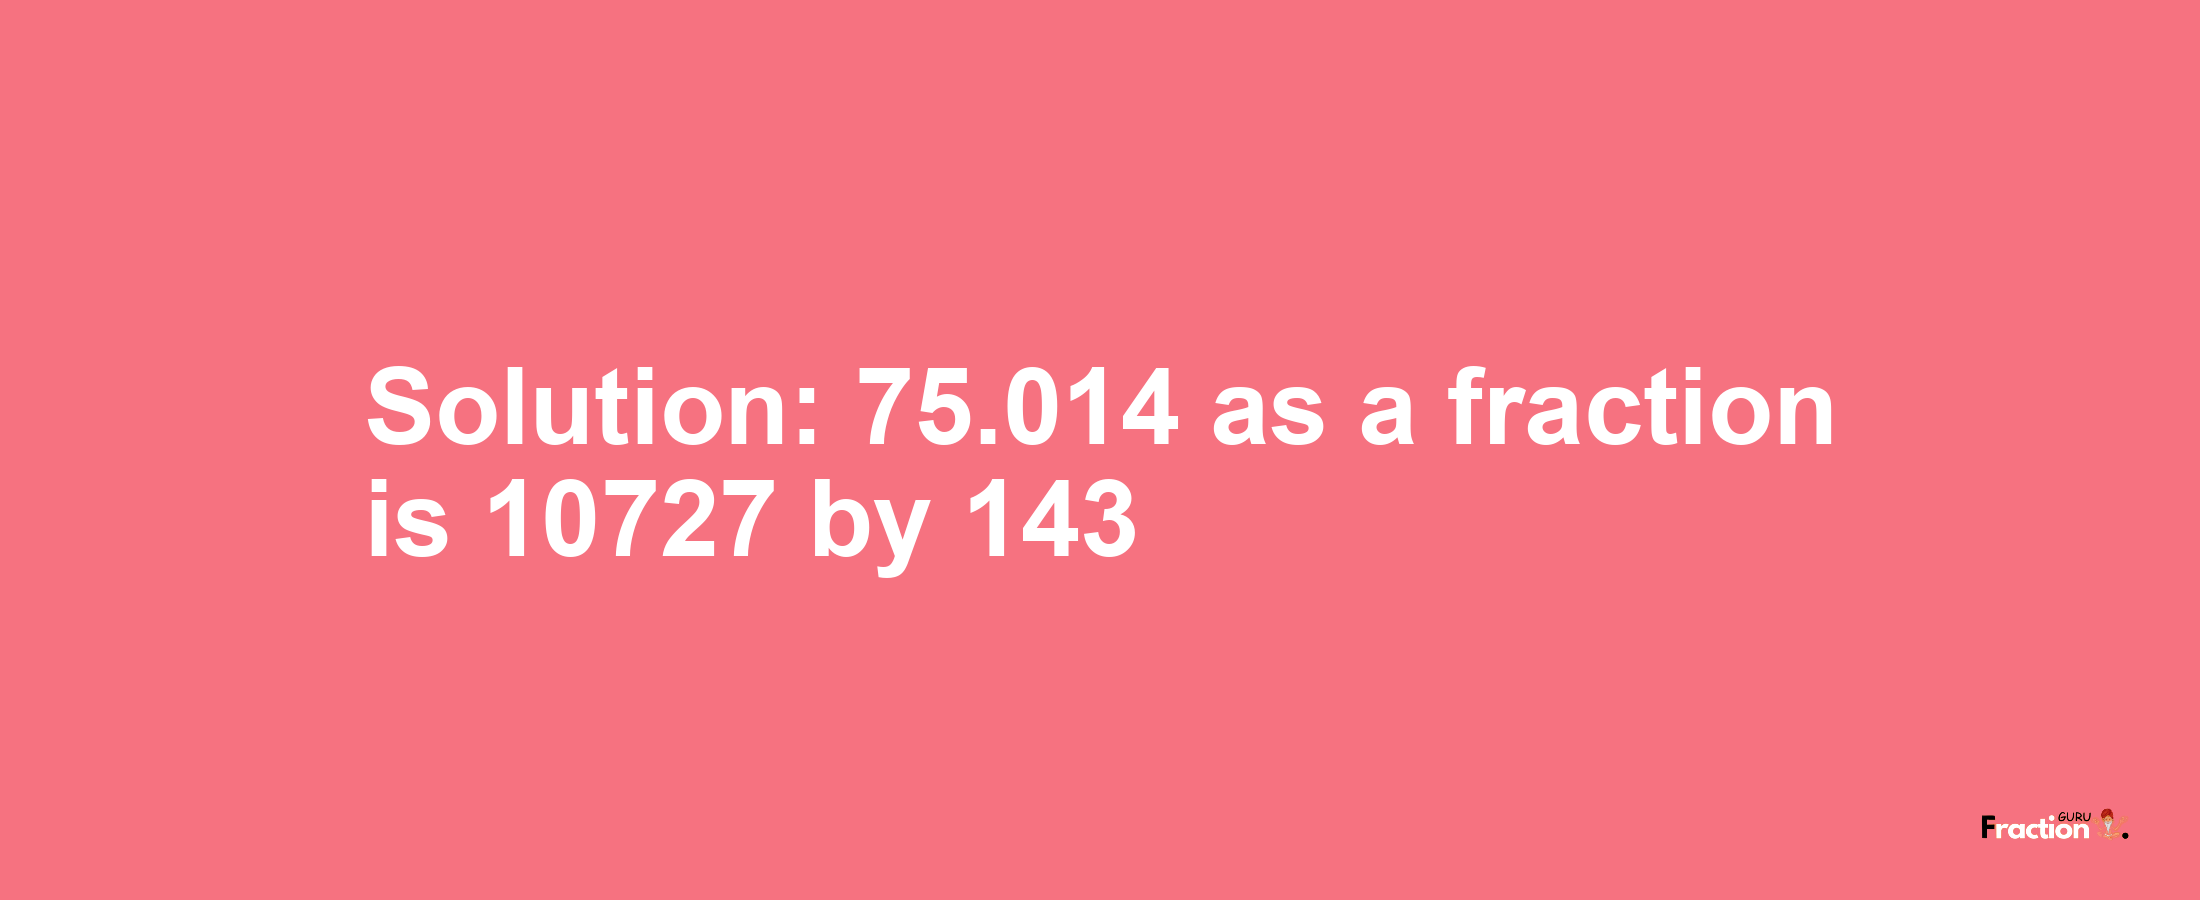 Solution:75.014 as a fraction is 10727/143